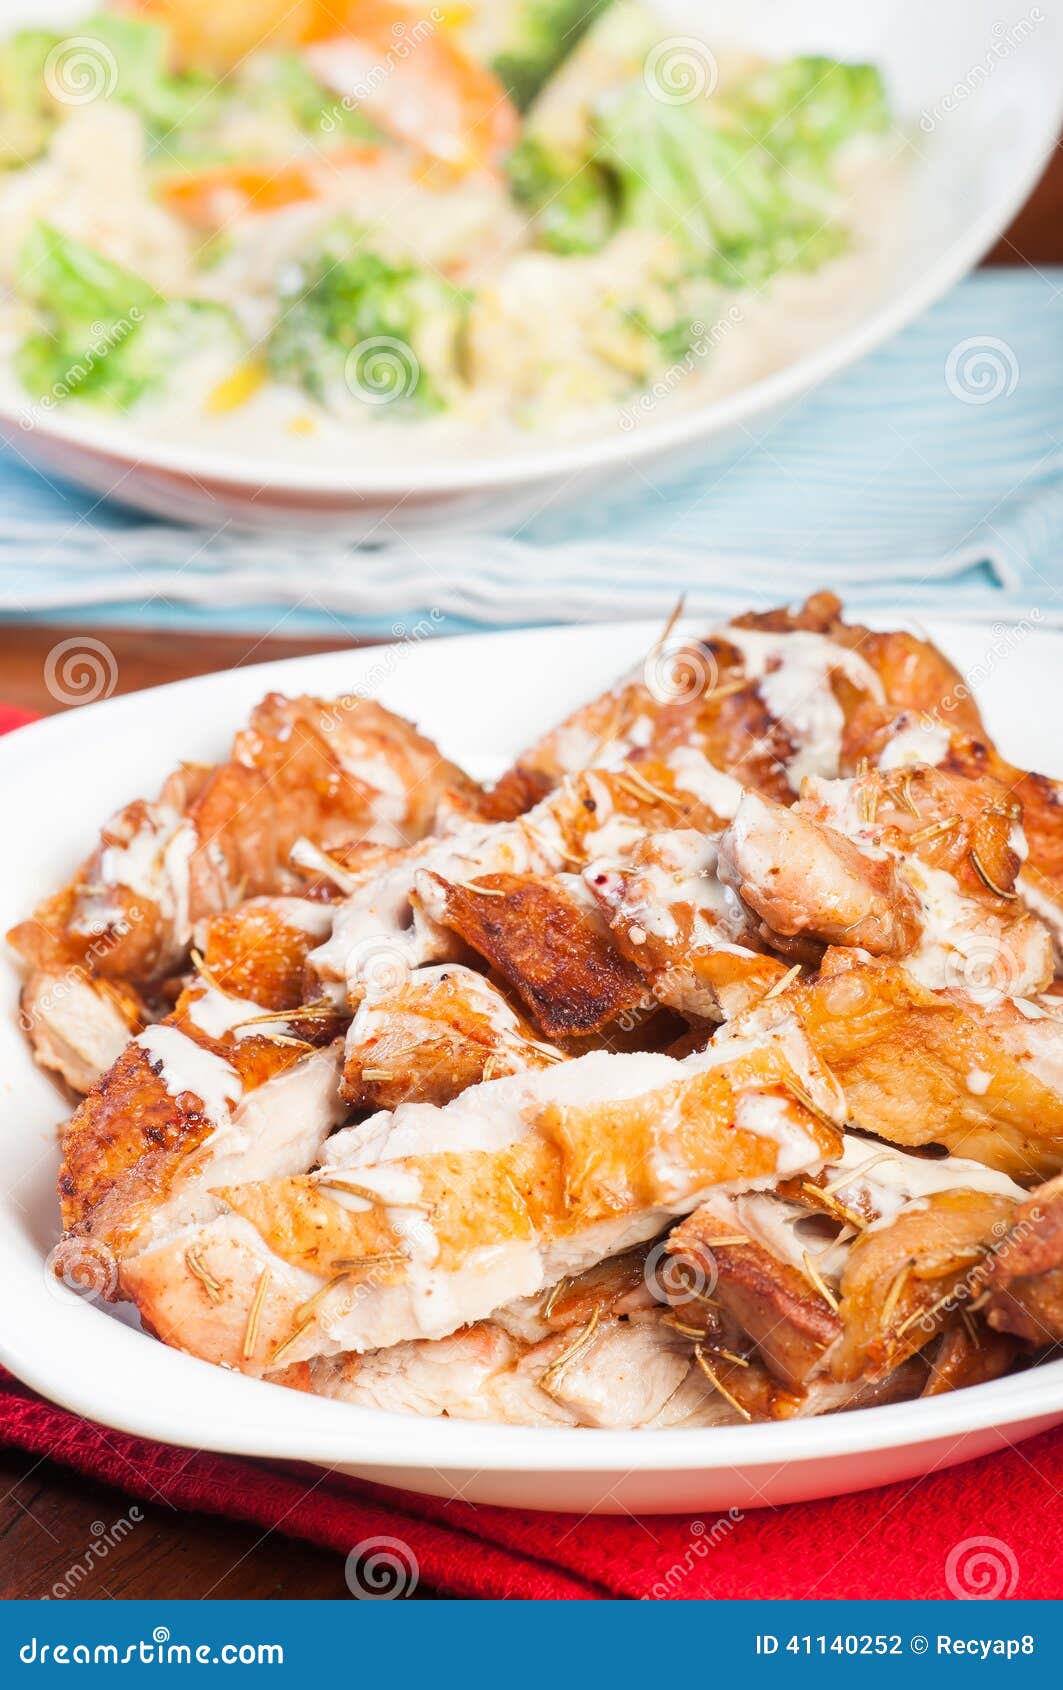 Roasted Chicken with Truffle Cream Sauce Stock Photo - Image of herbs ...